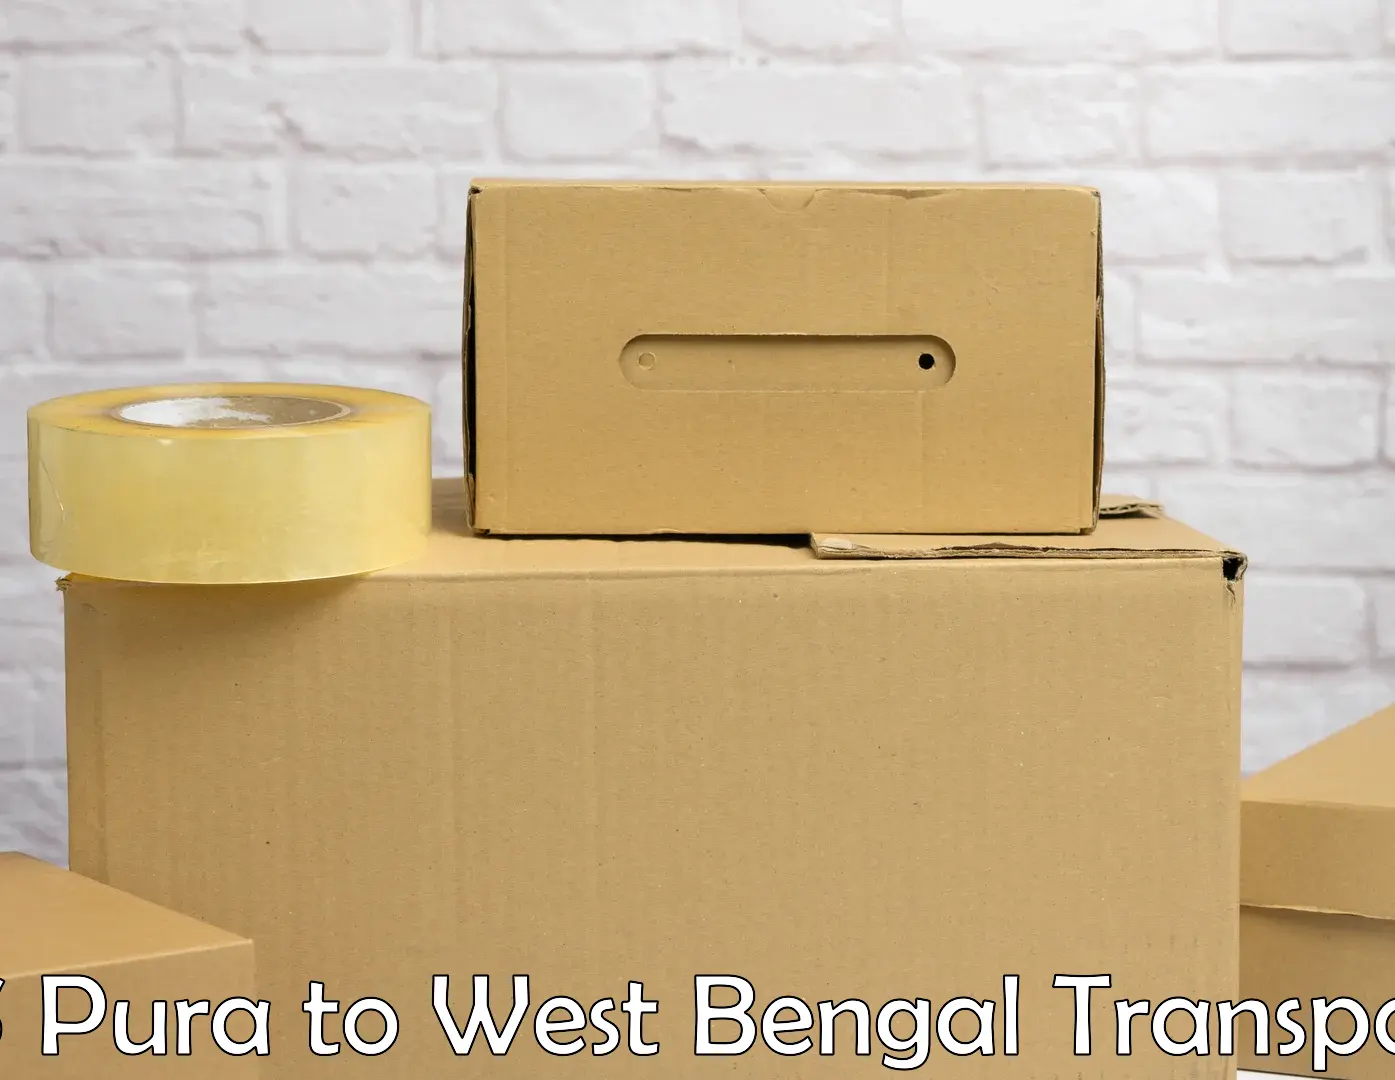 Transport shared services RS Pura to Medinipur